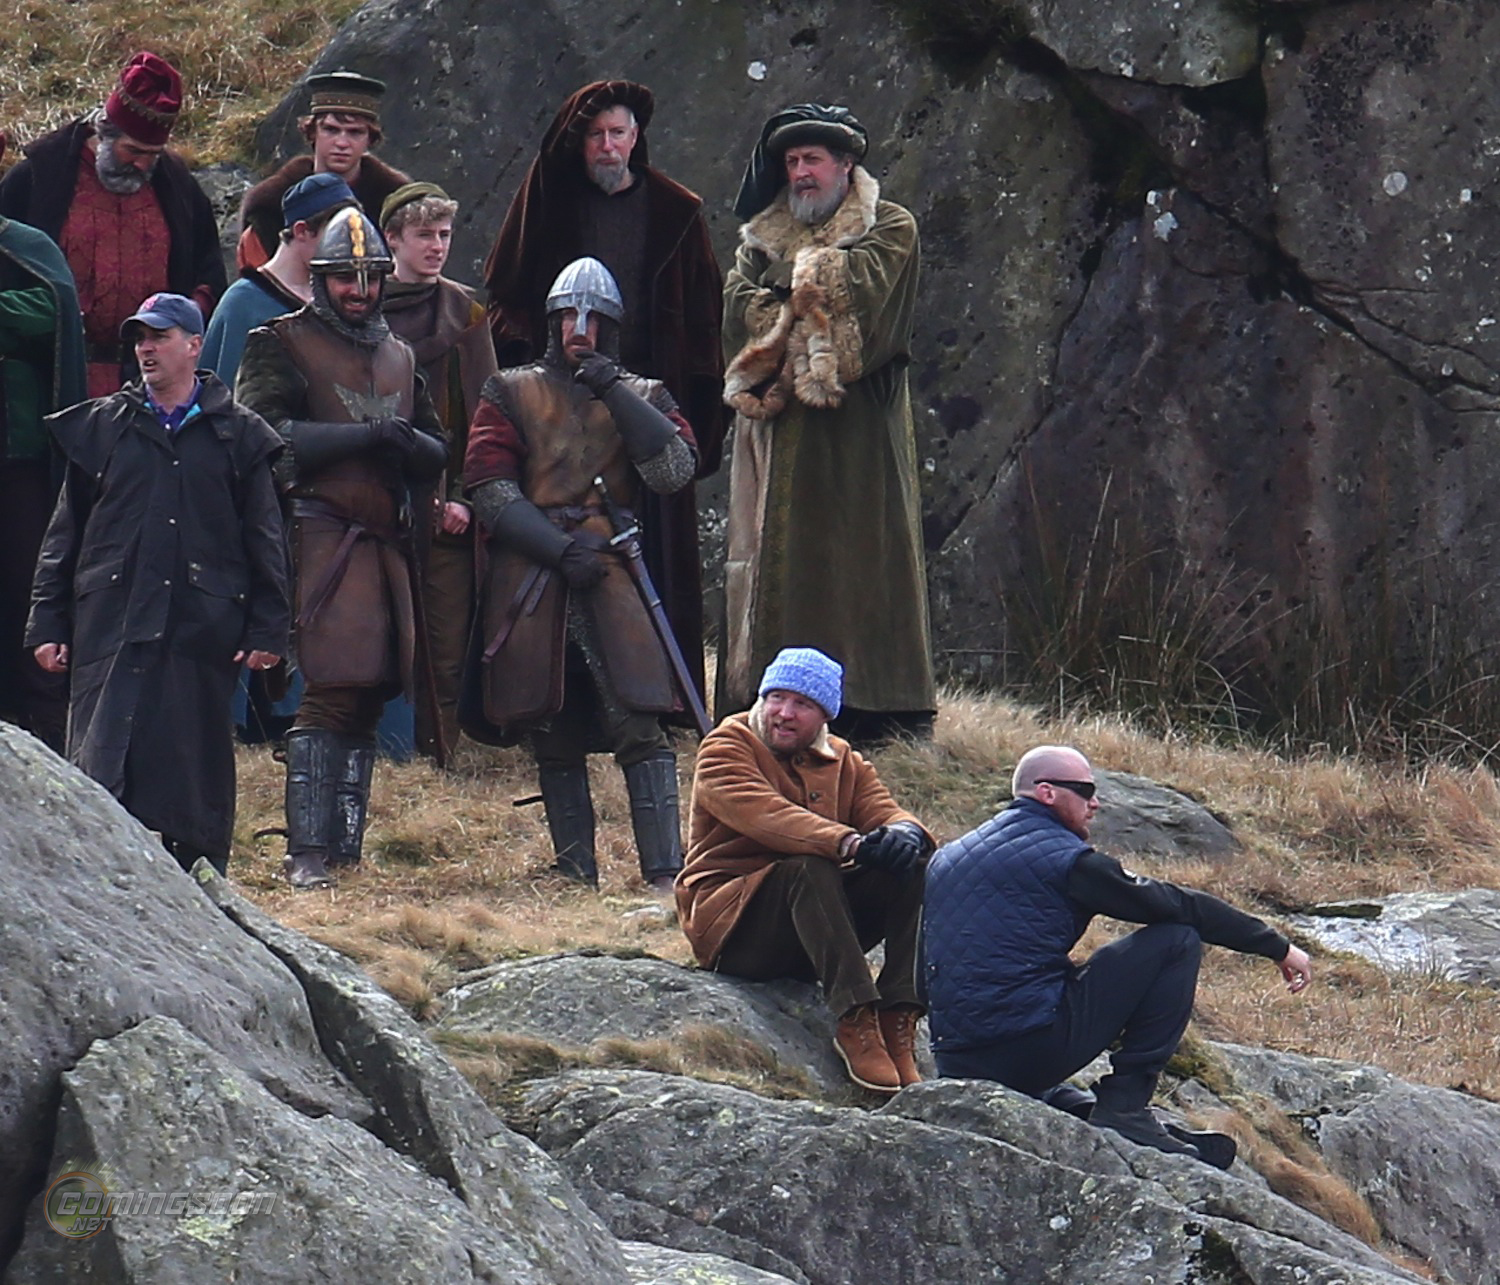 Filming 'The Knights of the Round Table:King Arthur'  in Wales

Featuring: Guy Ritchie
Where: Conwy, United Kingdom
When: 14 Apr 2015
Credit: WENN.com